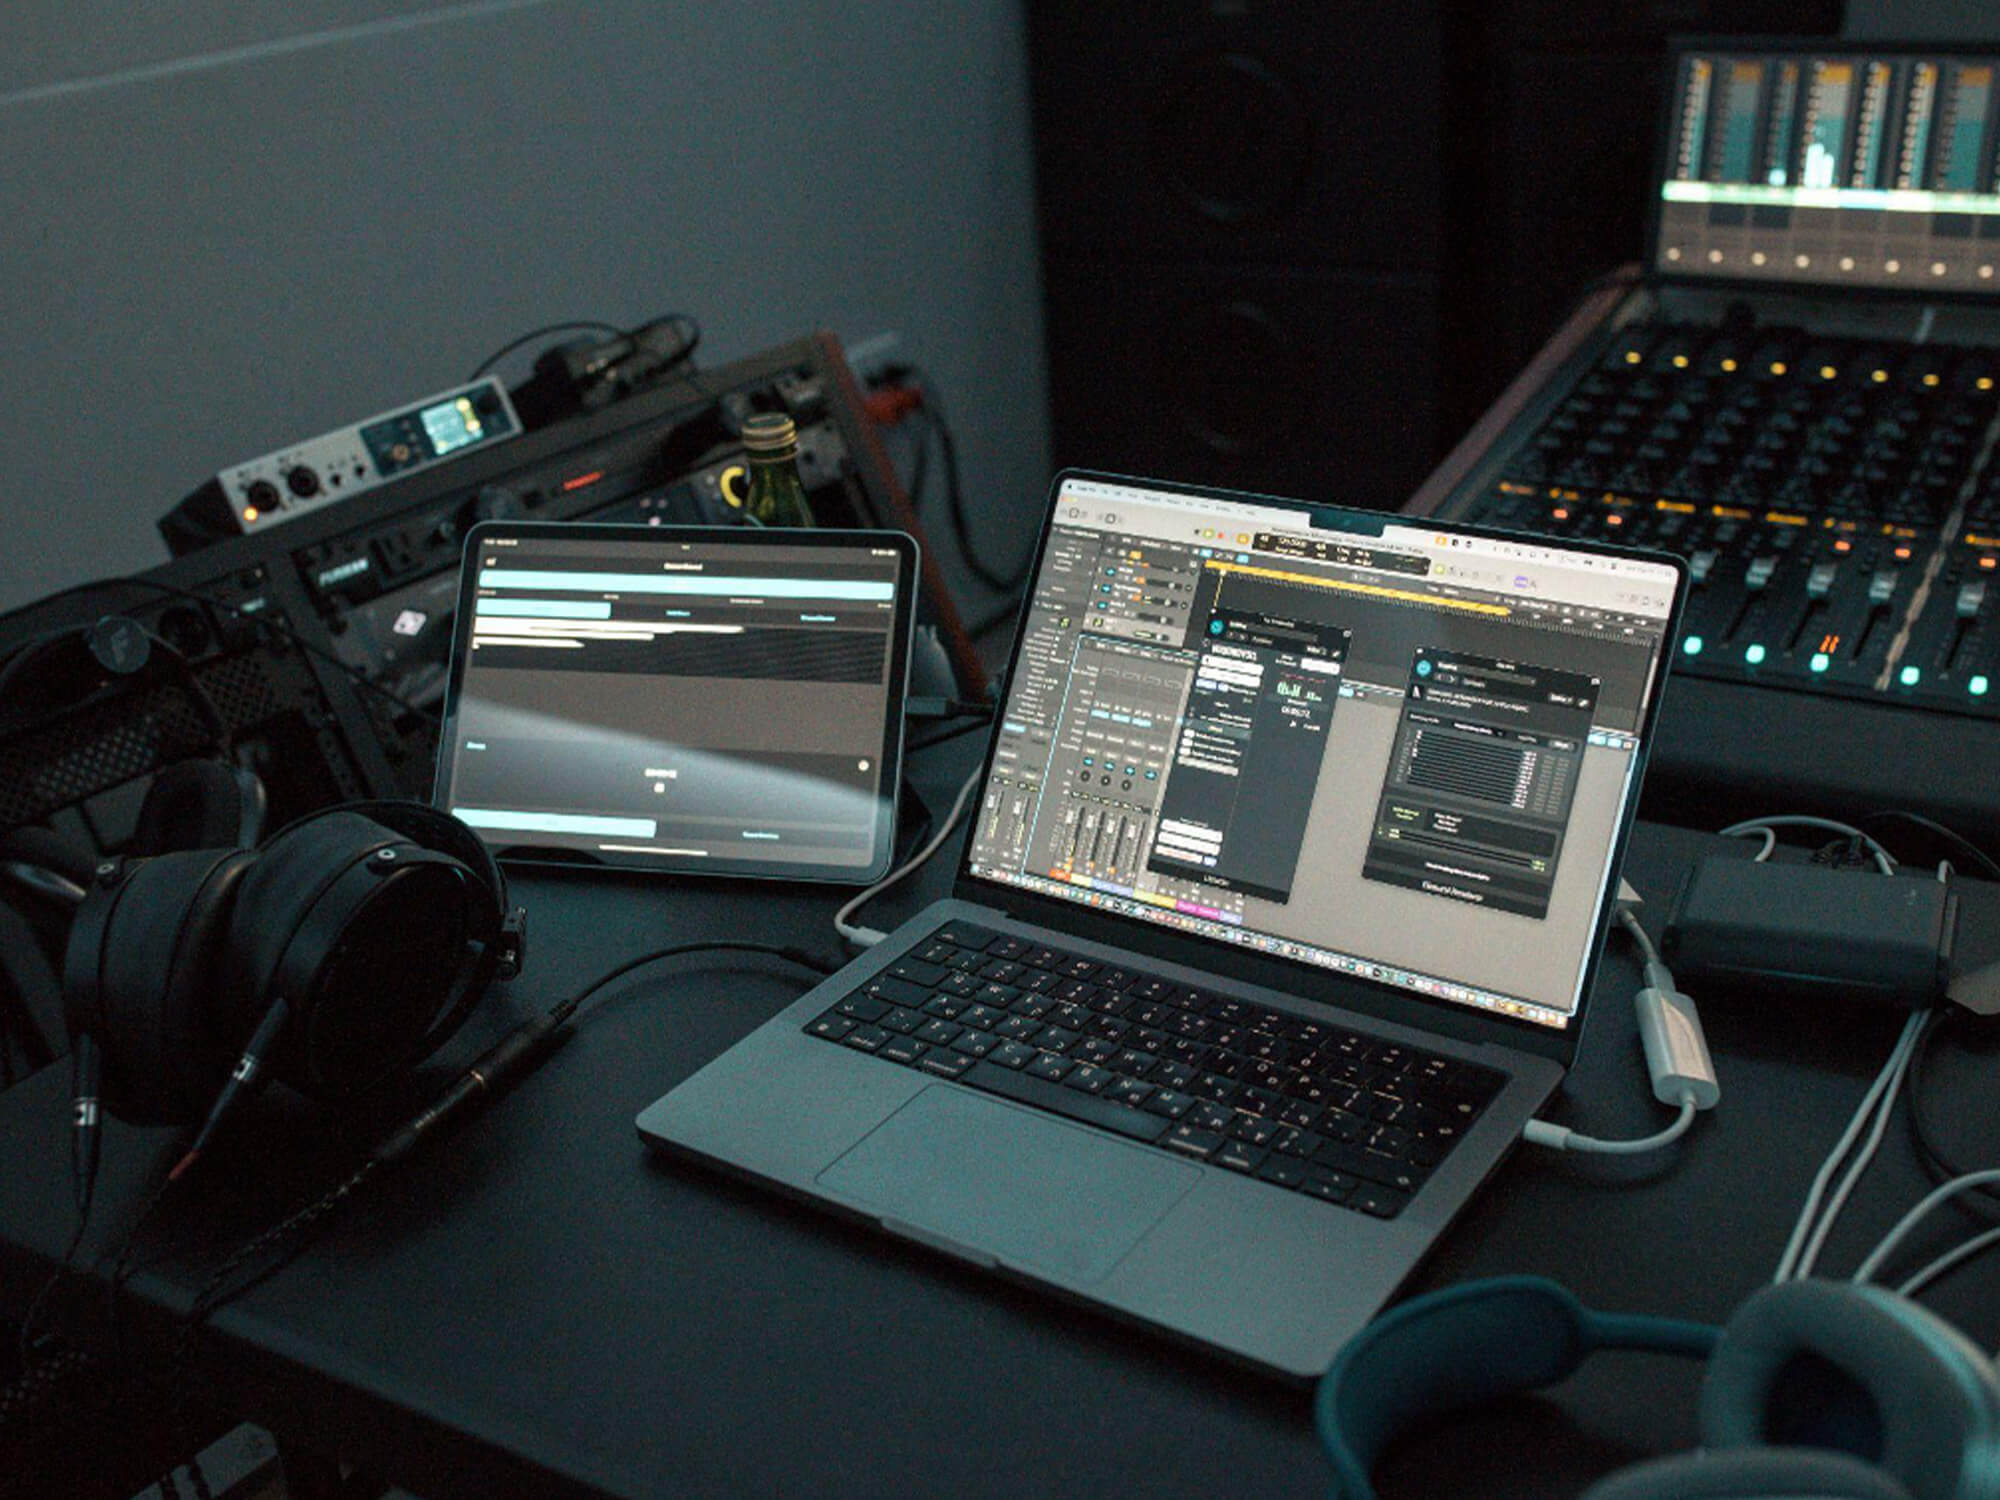 Audiomovers Binaural Renderer and LISTENTO player in use in a studio space